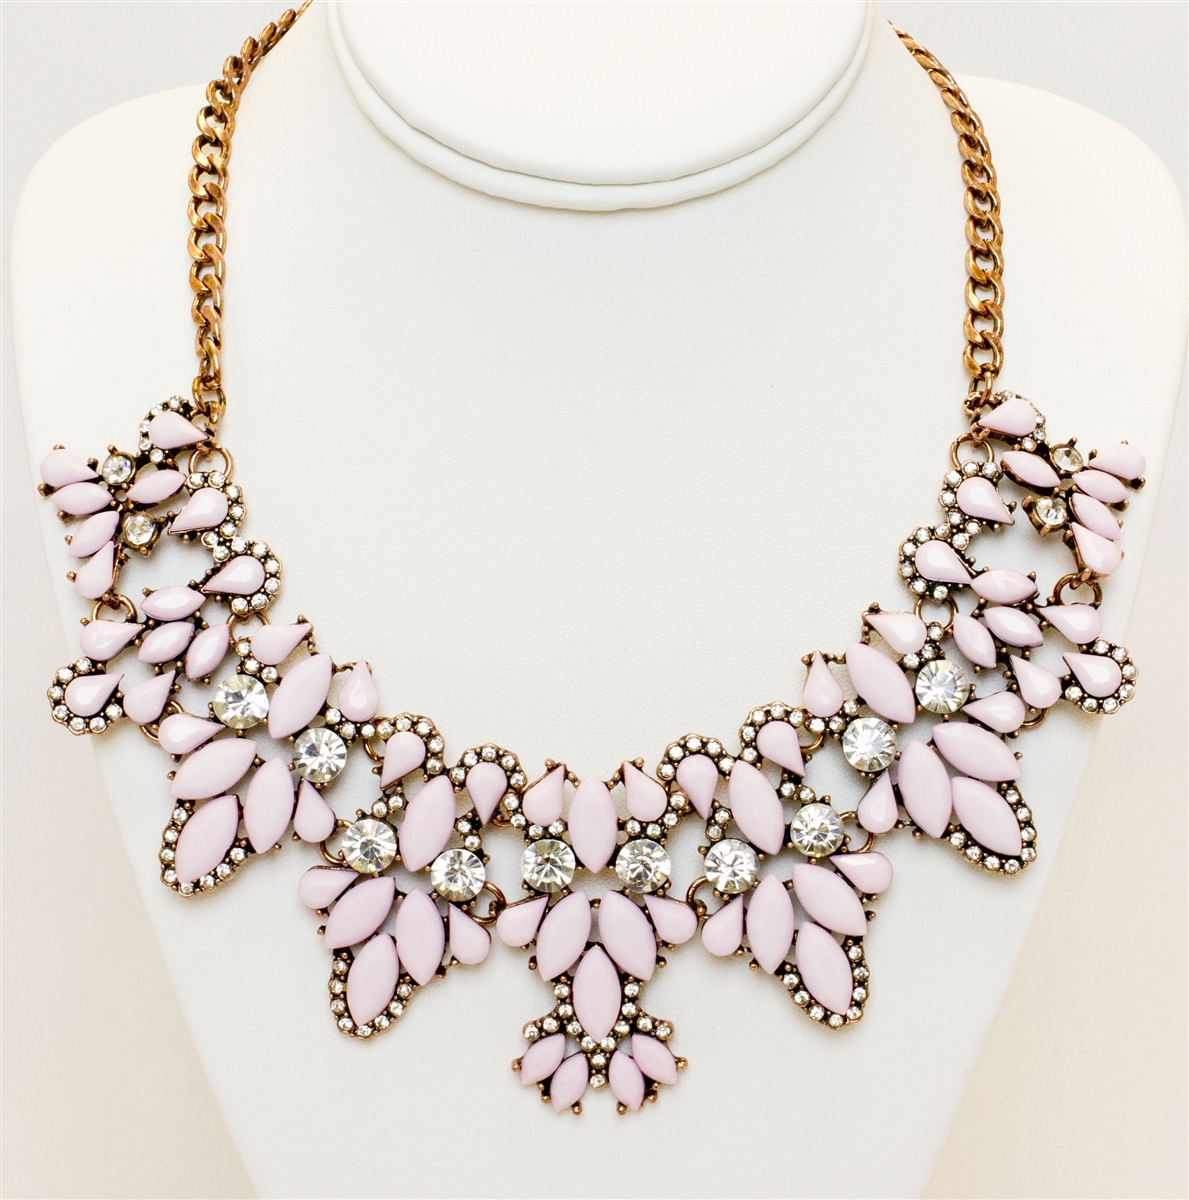 Statement Collar Necklace With Stones, Fashion Necklace, Spring Fashion  Necklace, Necklace With Light Pink Stones